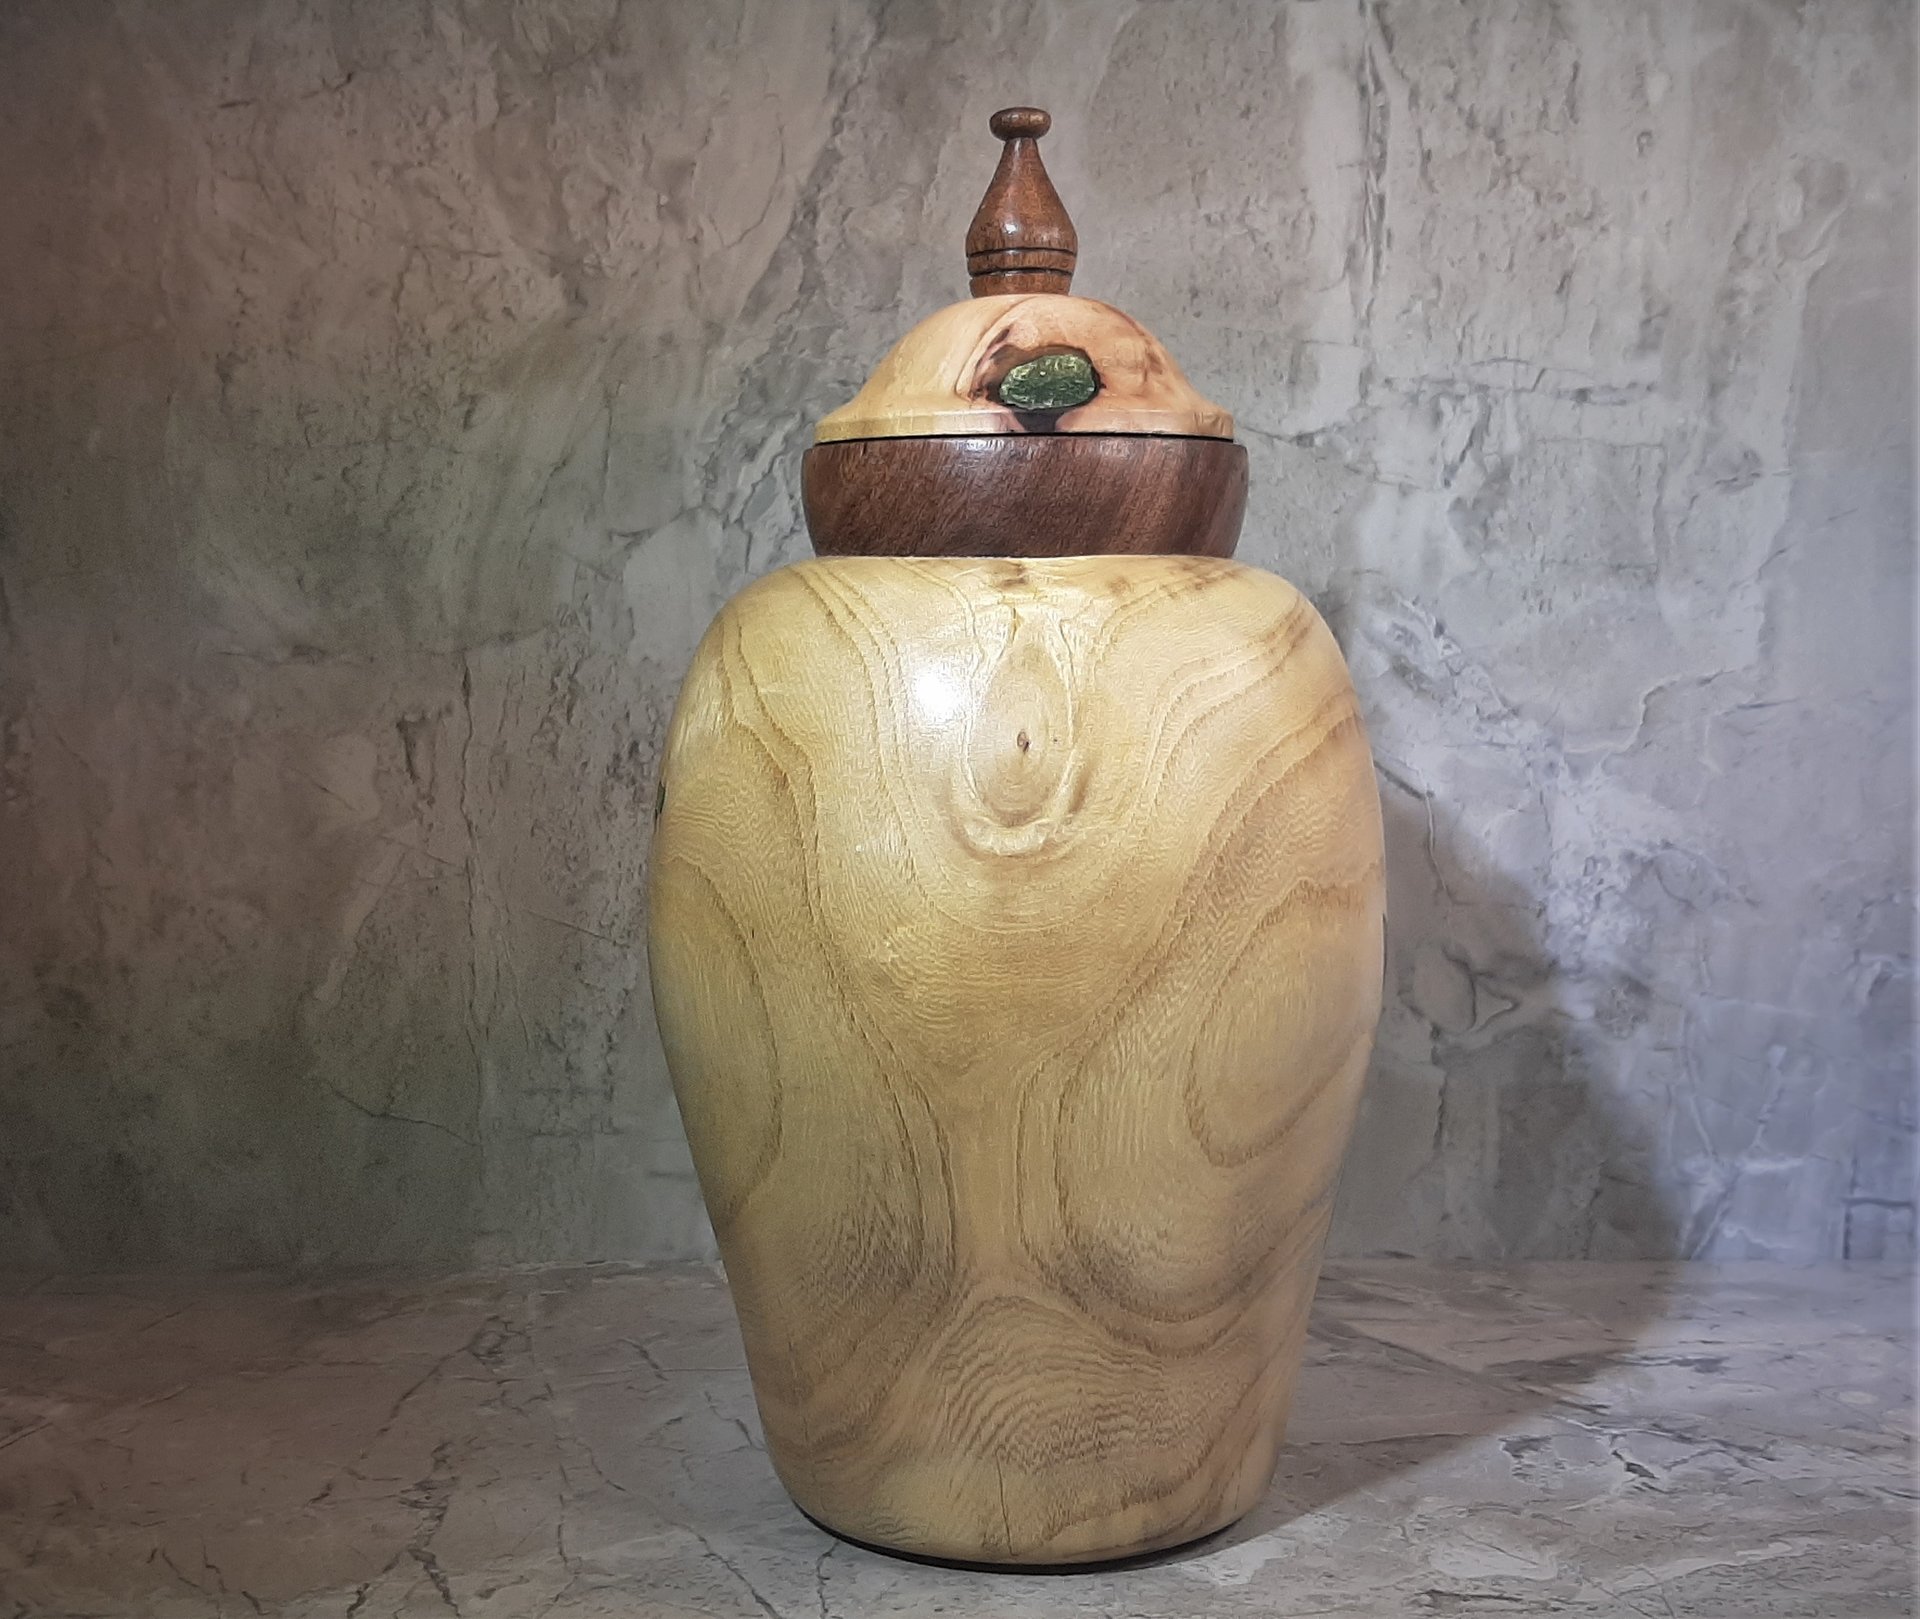 Ash and Mesquite Vessel with Threaded Lid